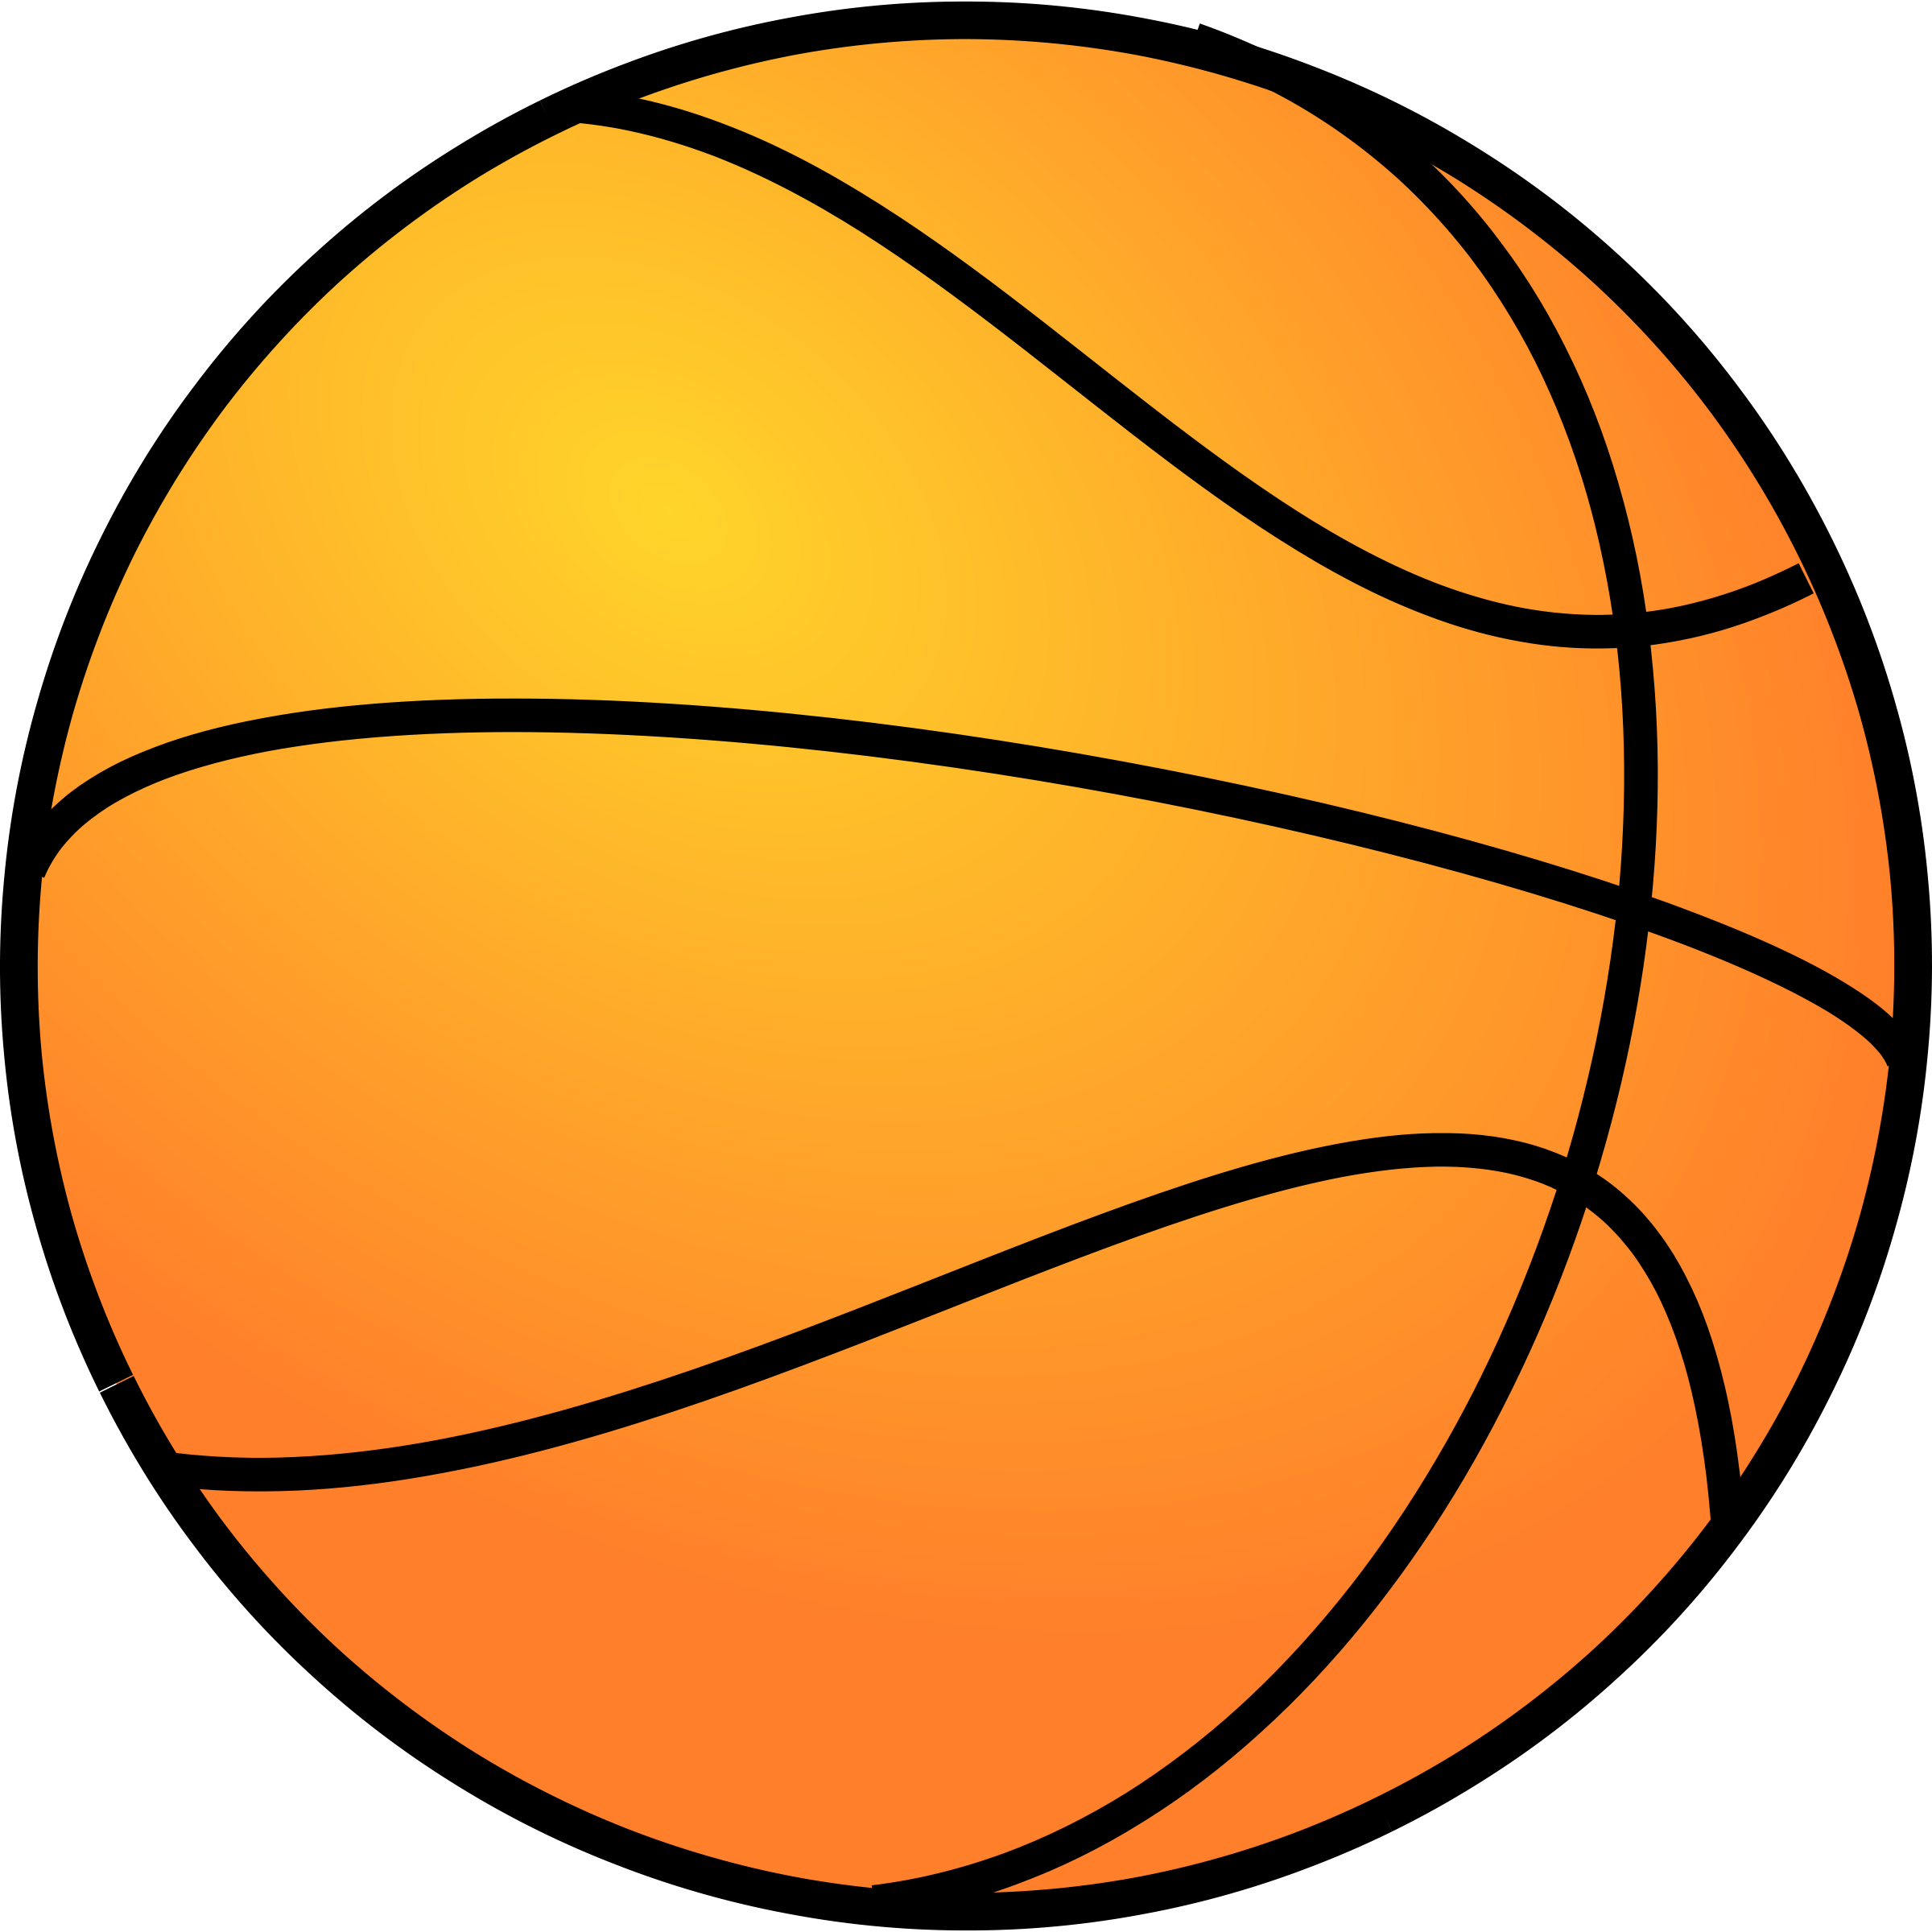 basketball clipart - Basketball Clipart Images